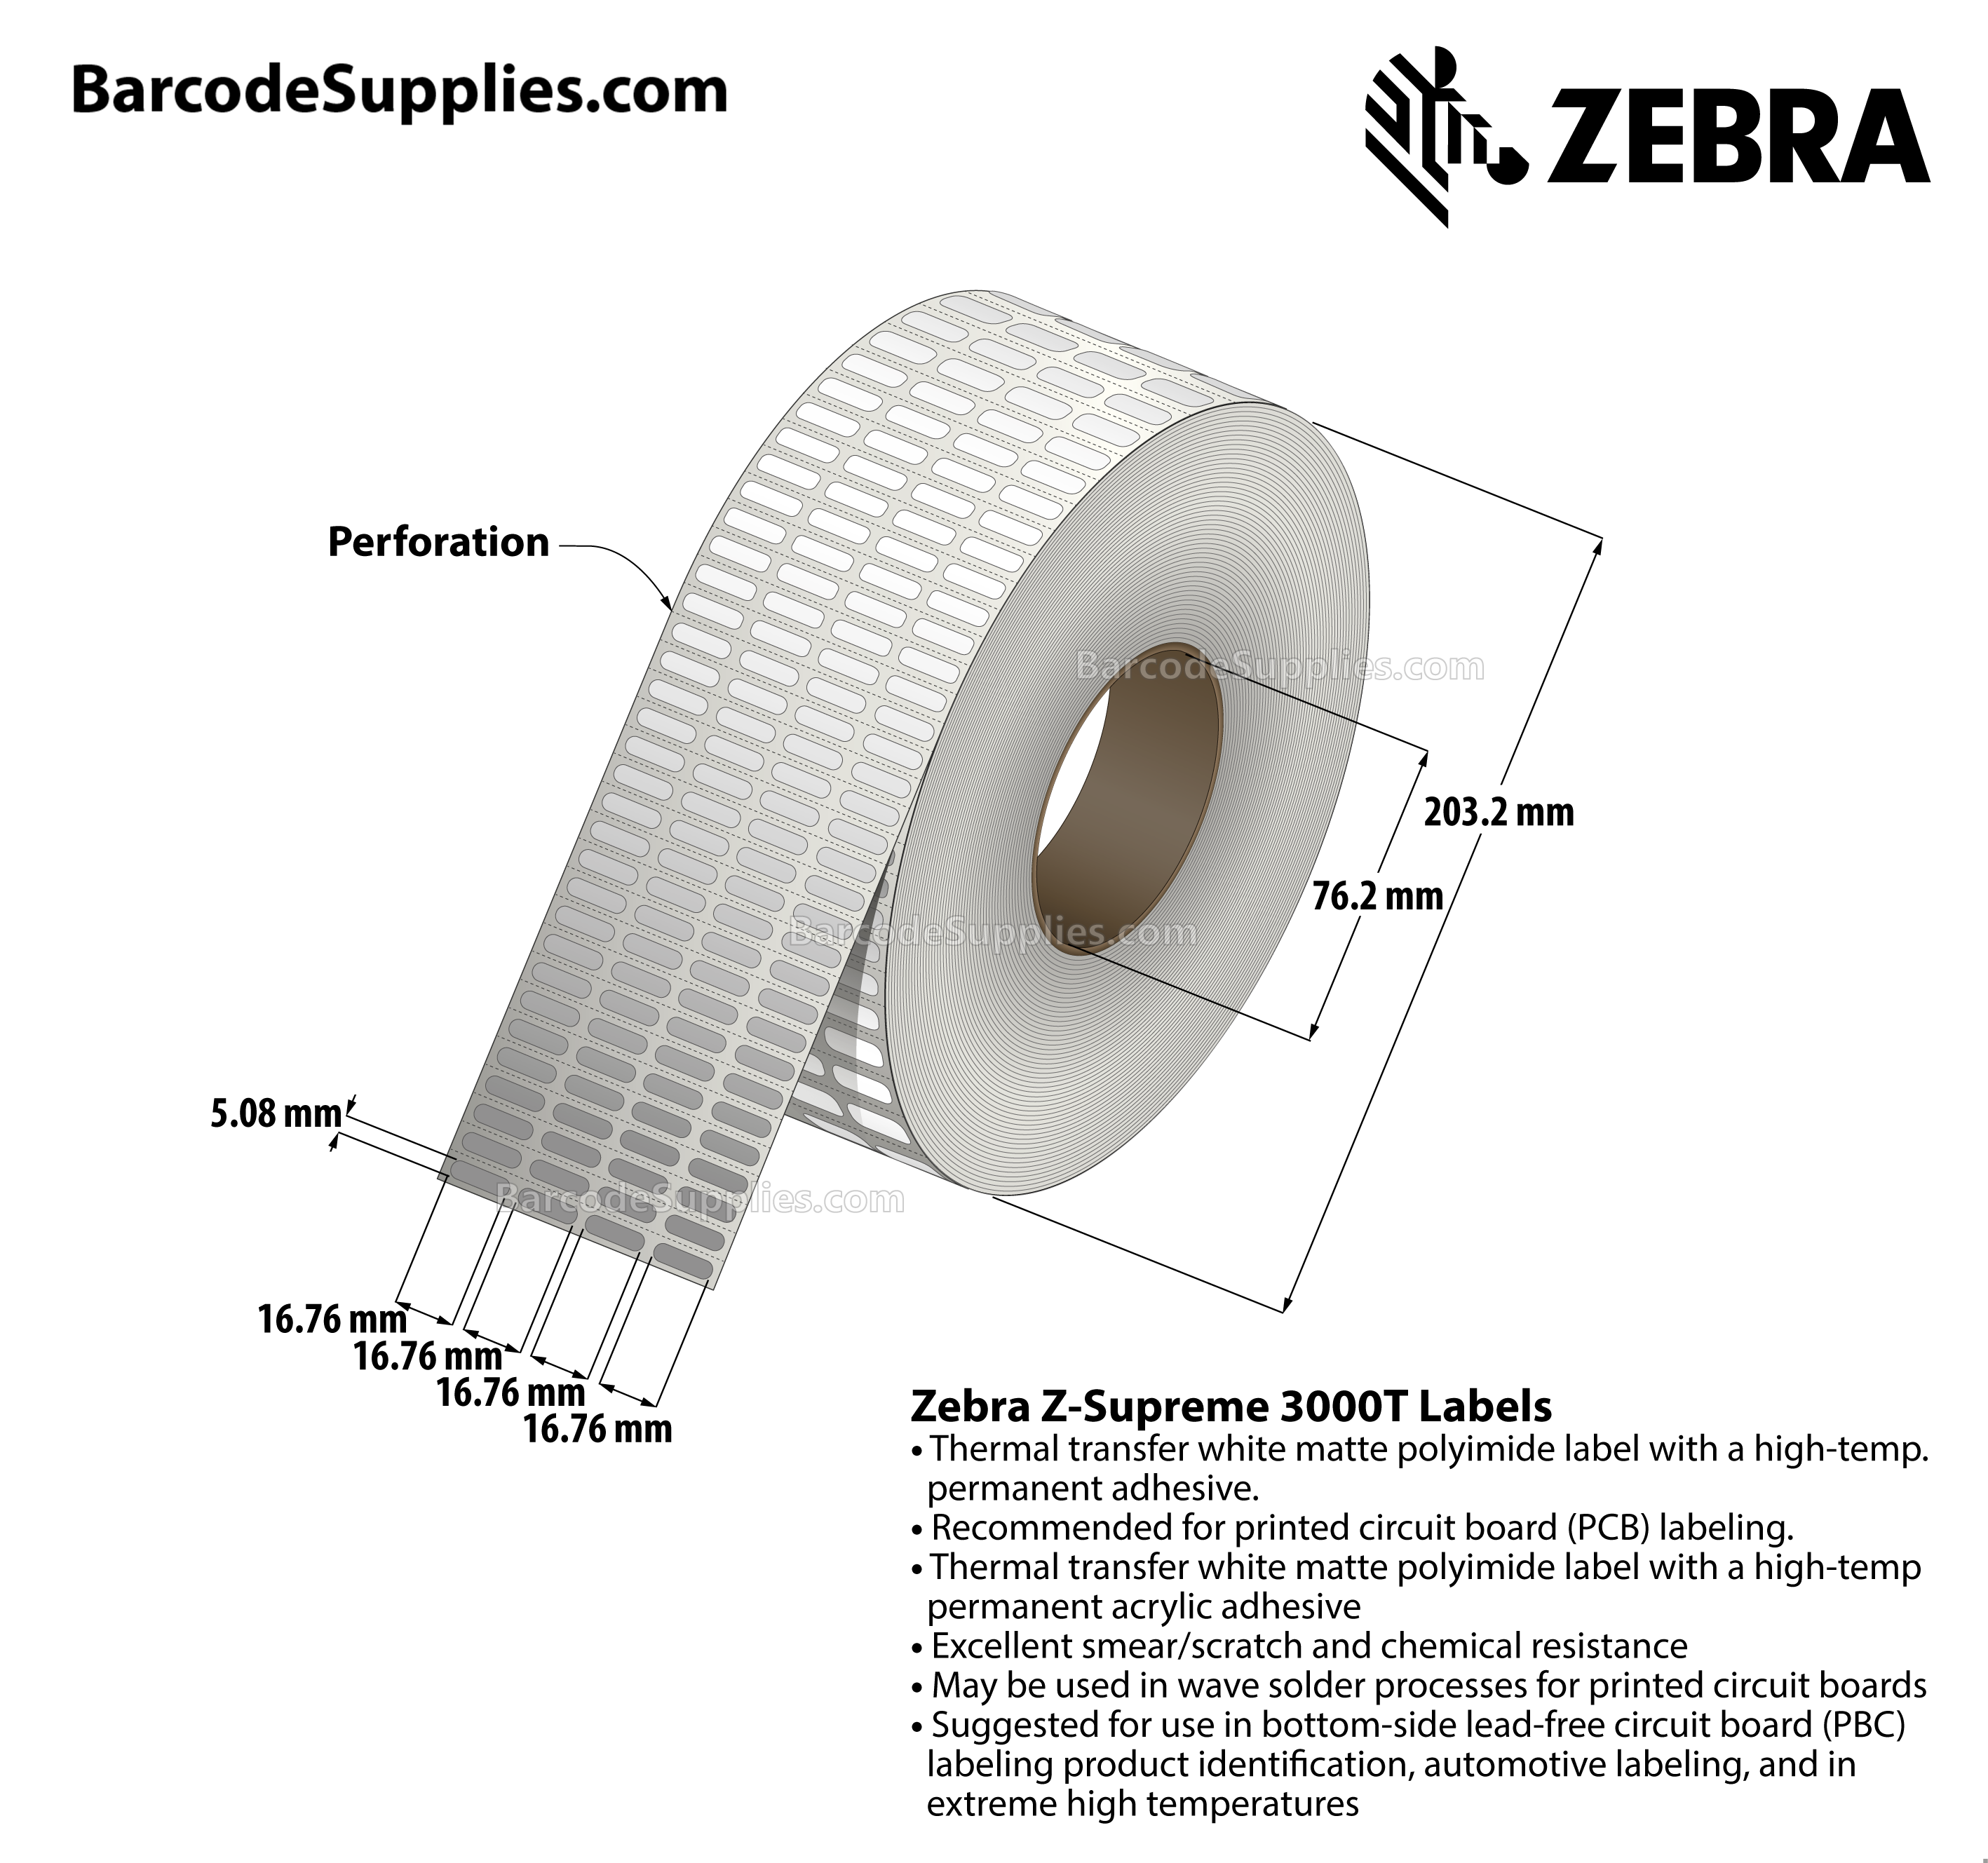 0.66 x 0.2 Thermal Transfer White Z-Supreme 3000T (4-Across) Labels With High-temp Adhesive - Perforated - 10000 Labels Per Roll - Carton Of 1 Rolls - 10000 Labels Total - MPN: 10023223